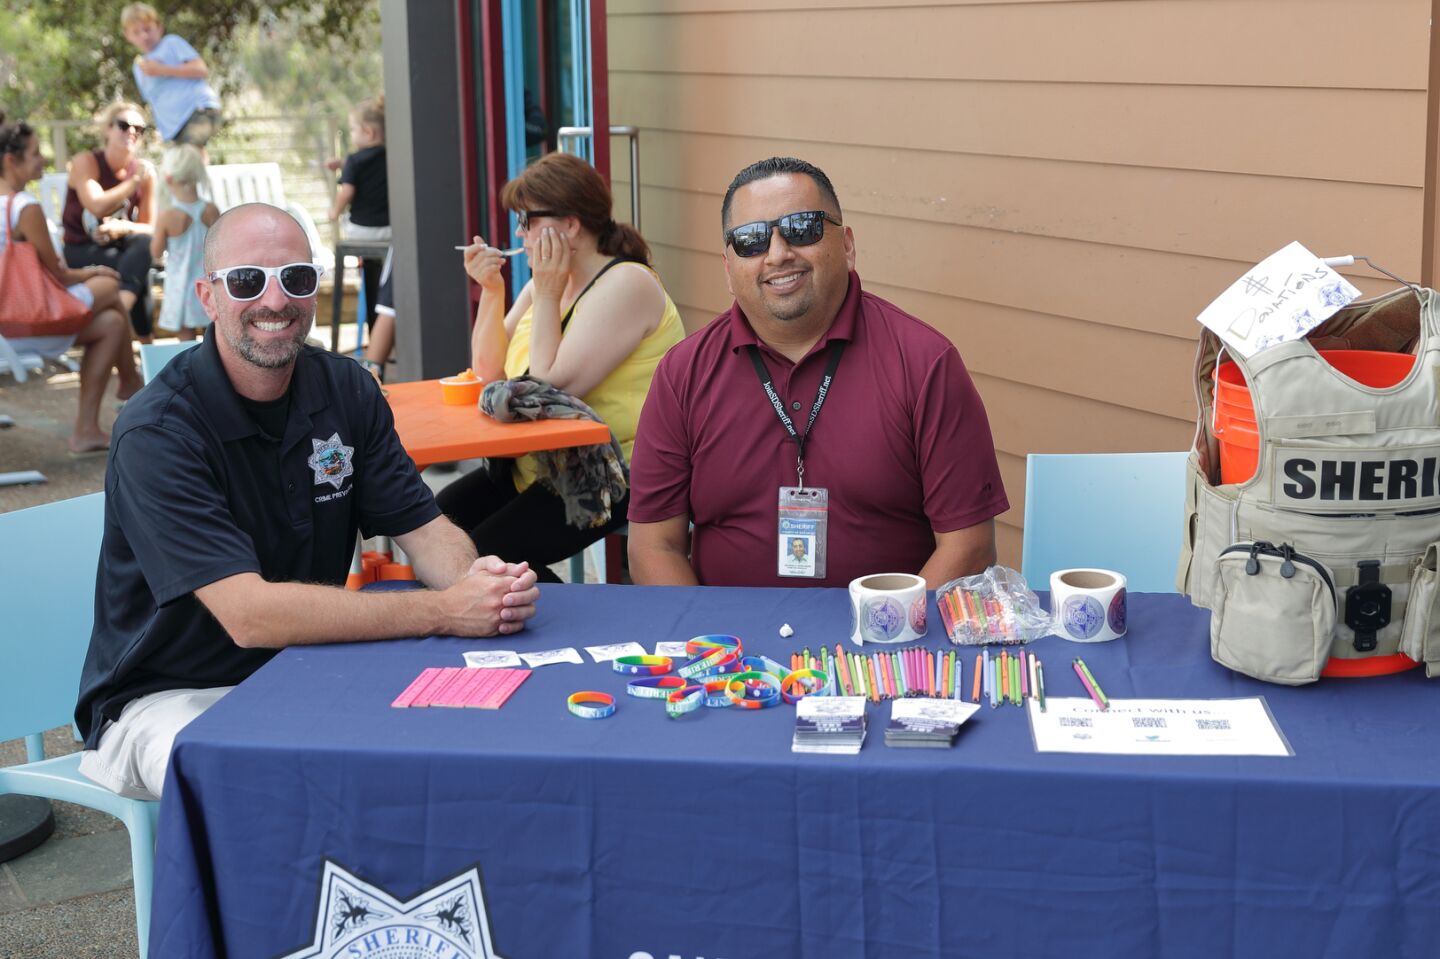 Crime Prevention Specialists Jonathan Simon and George Hernandez welcomed customers to the Cali Ice Cream Scoops for a Cause benefit for the Boys & Girls Club